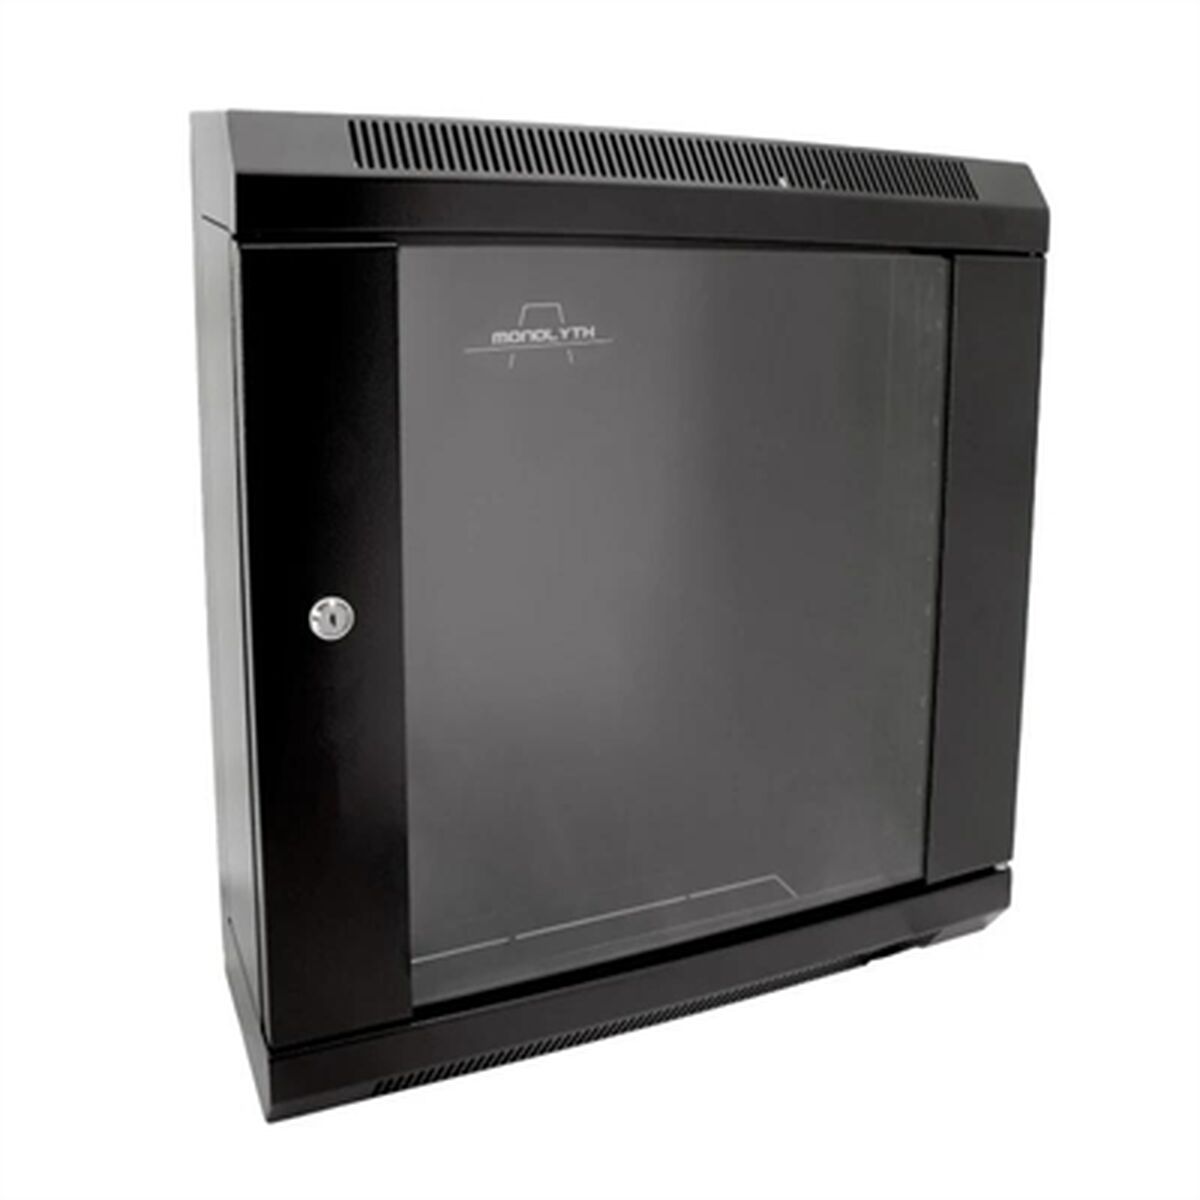 Wall-mounted Rack Cabinet Monolyth WM6112, Monolyth, Computing, Accessories, wall-mounted-rack-cabinet-monolyth-wm6112, Brand_Monolyth, category-reference-2609, category-reference-2803, category-reference-2828, category-reference-t-19685, category-reference-t-19908, category-reference-t-21349, Condition_NEW, furniture, networks/wiring, organisation, Price_50 - 100, Teleworking, RiotNook